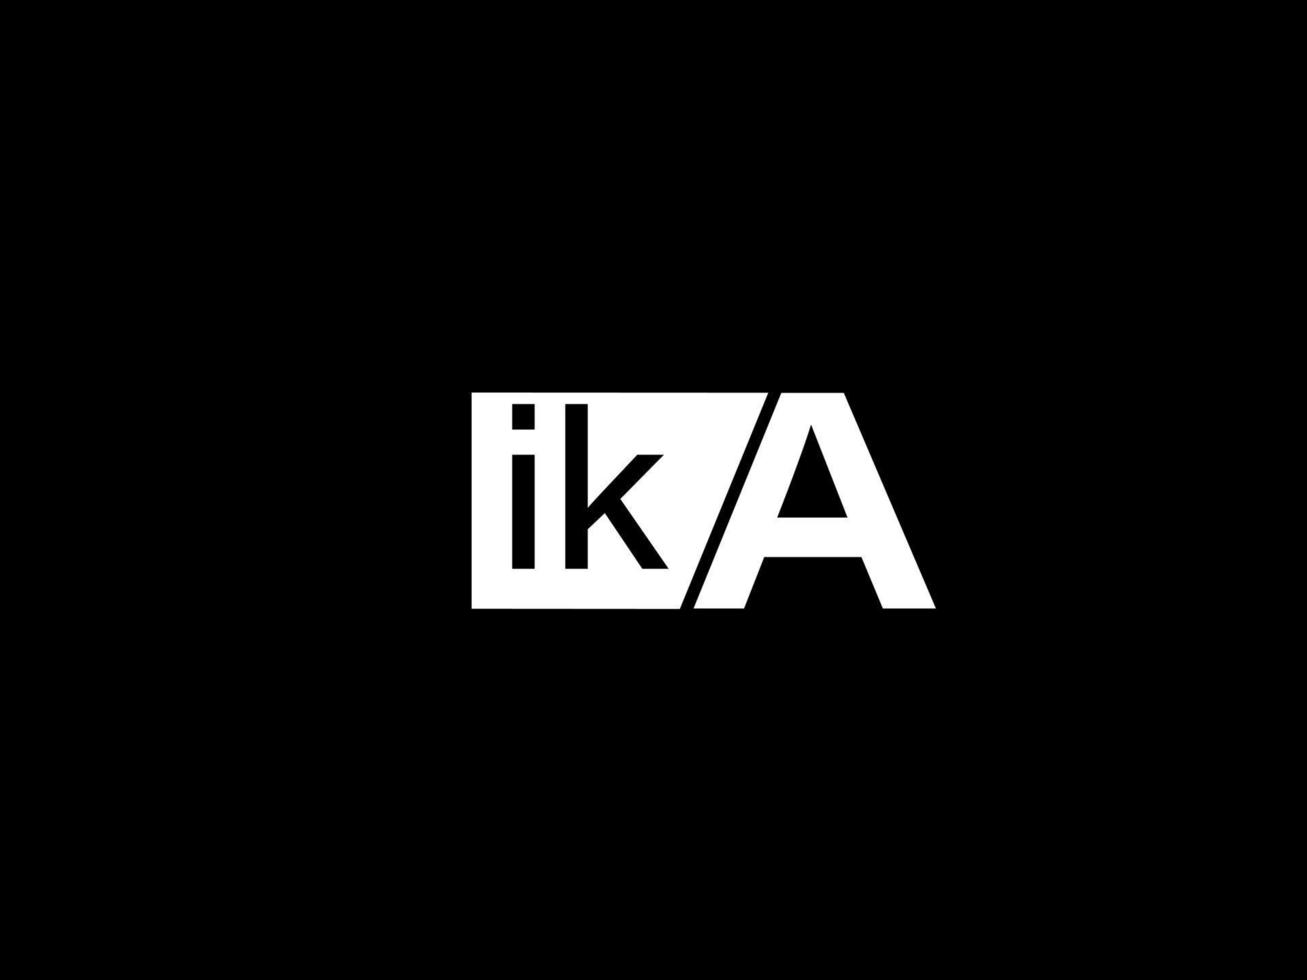 IKA Logo and Graphics design vector art, Icons isolated on black background